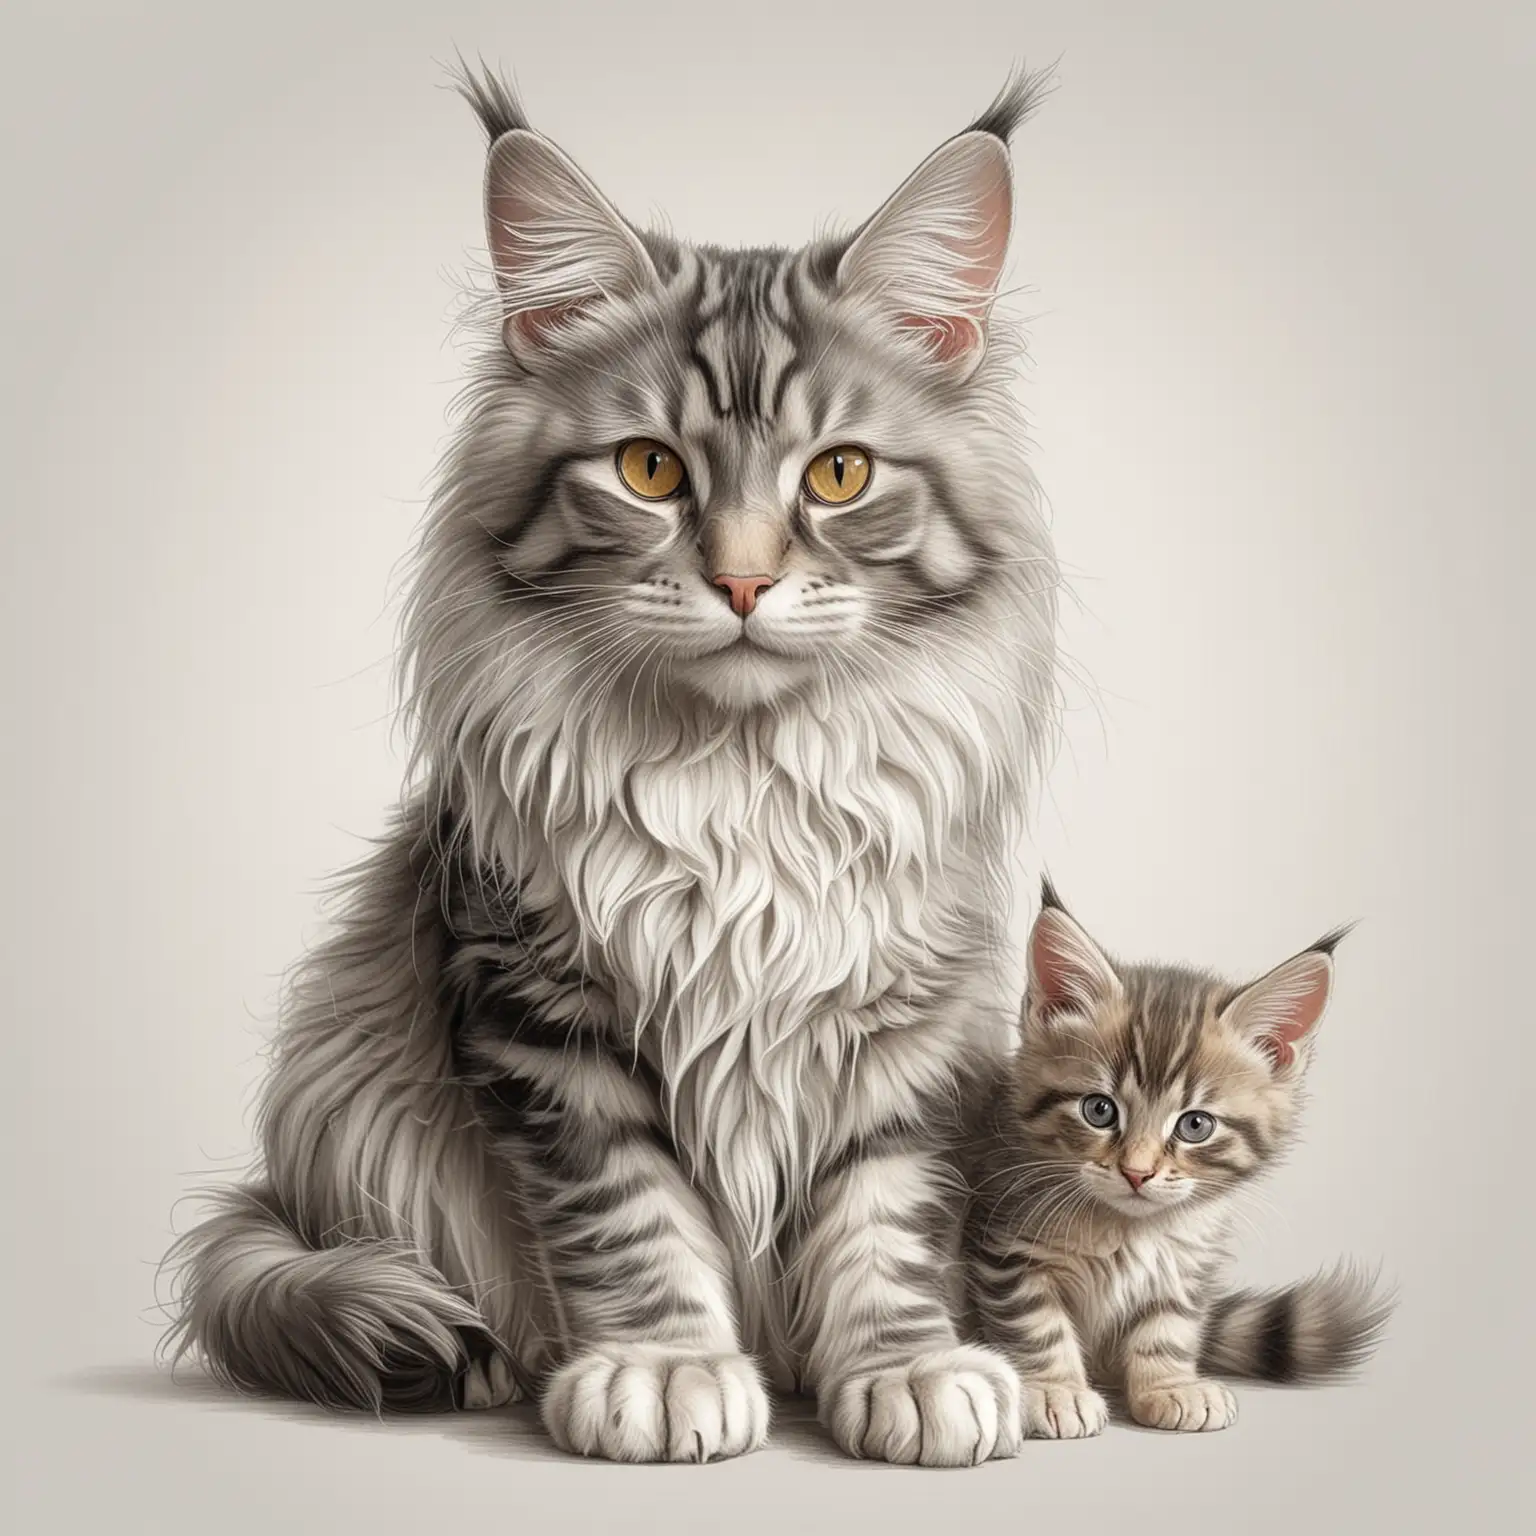 Realistic-Pencil-Drawing-of-Maine-Coon-Cat-with-Kitten-on-White-Background